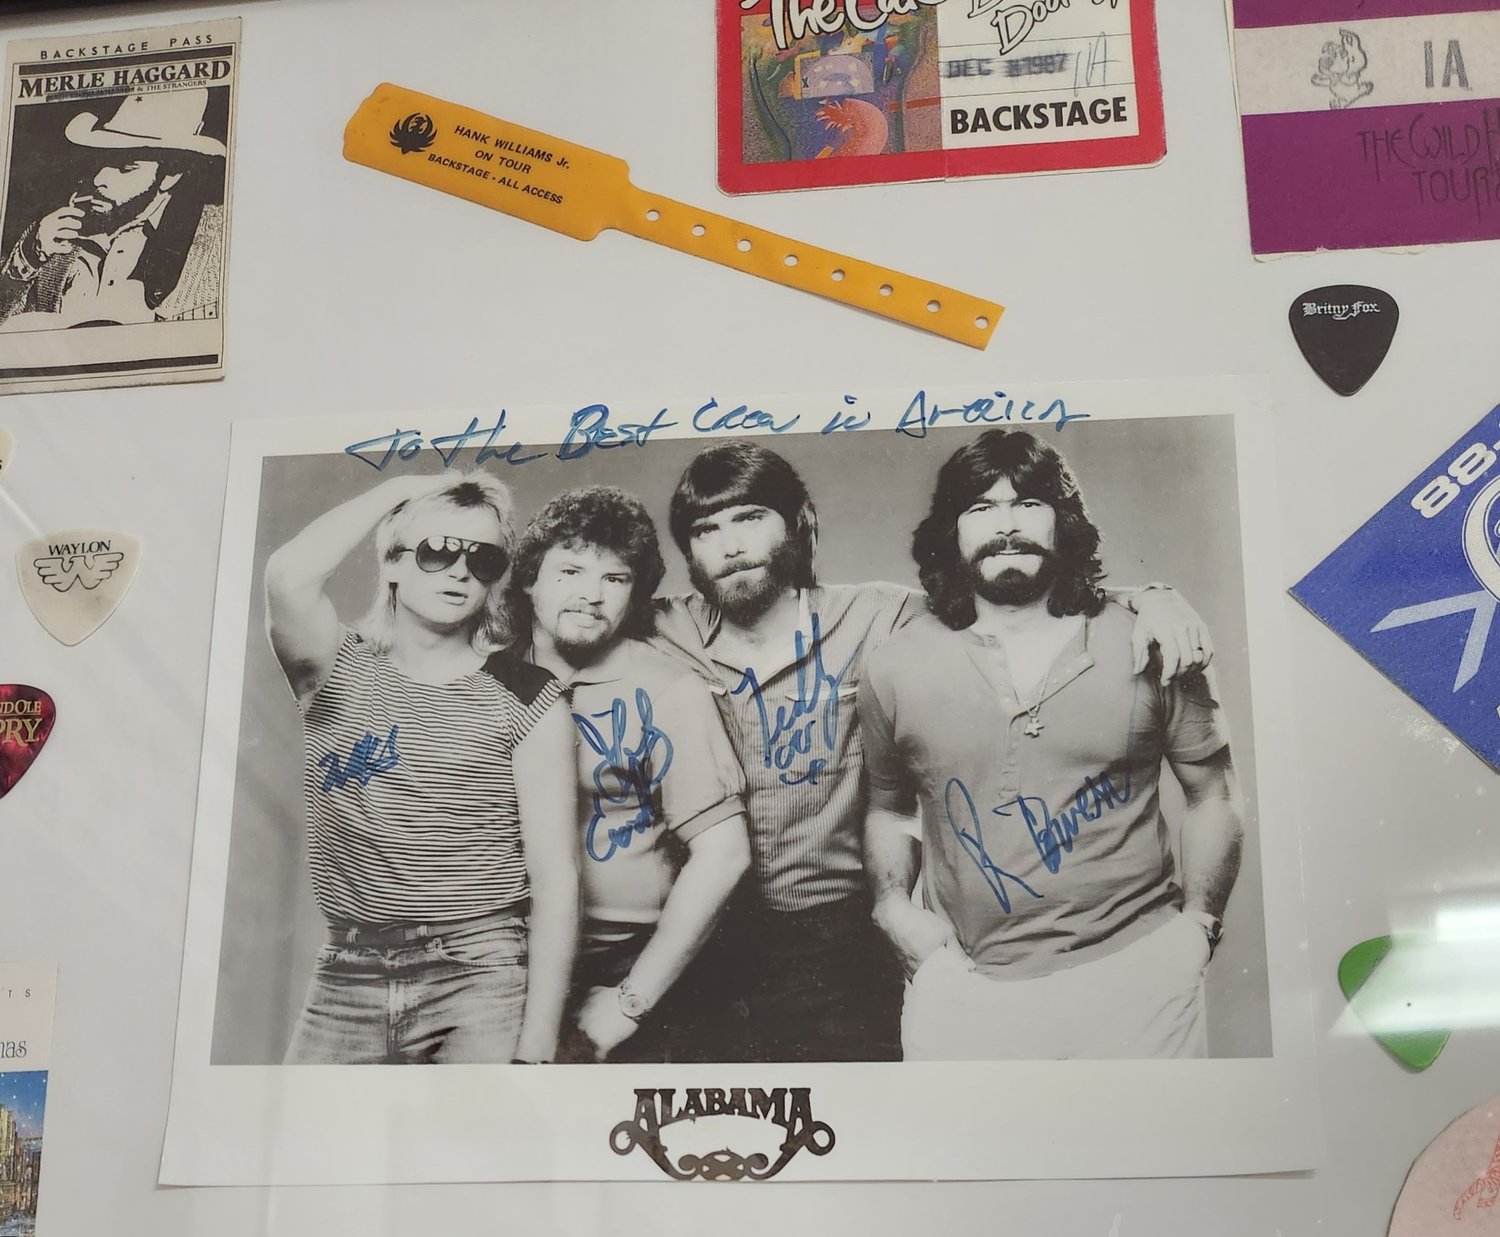 An autographed photo of Alabama on the wall of Backwoods Recordings studio.